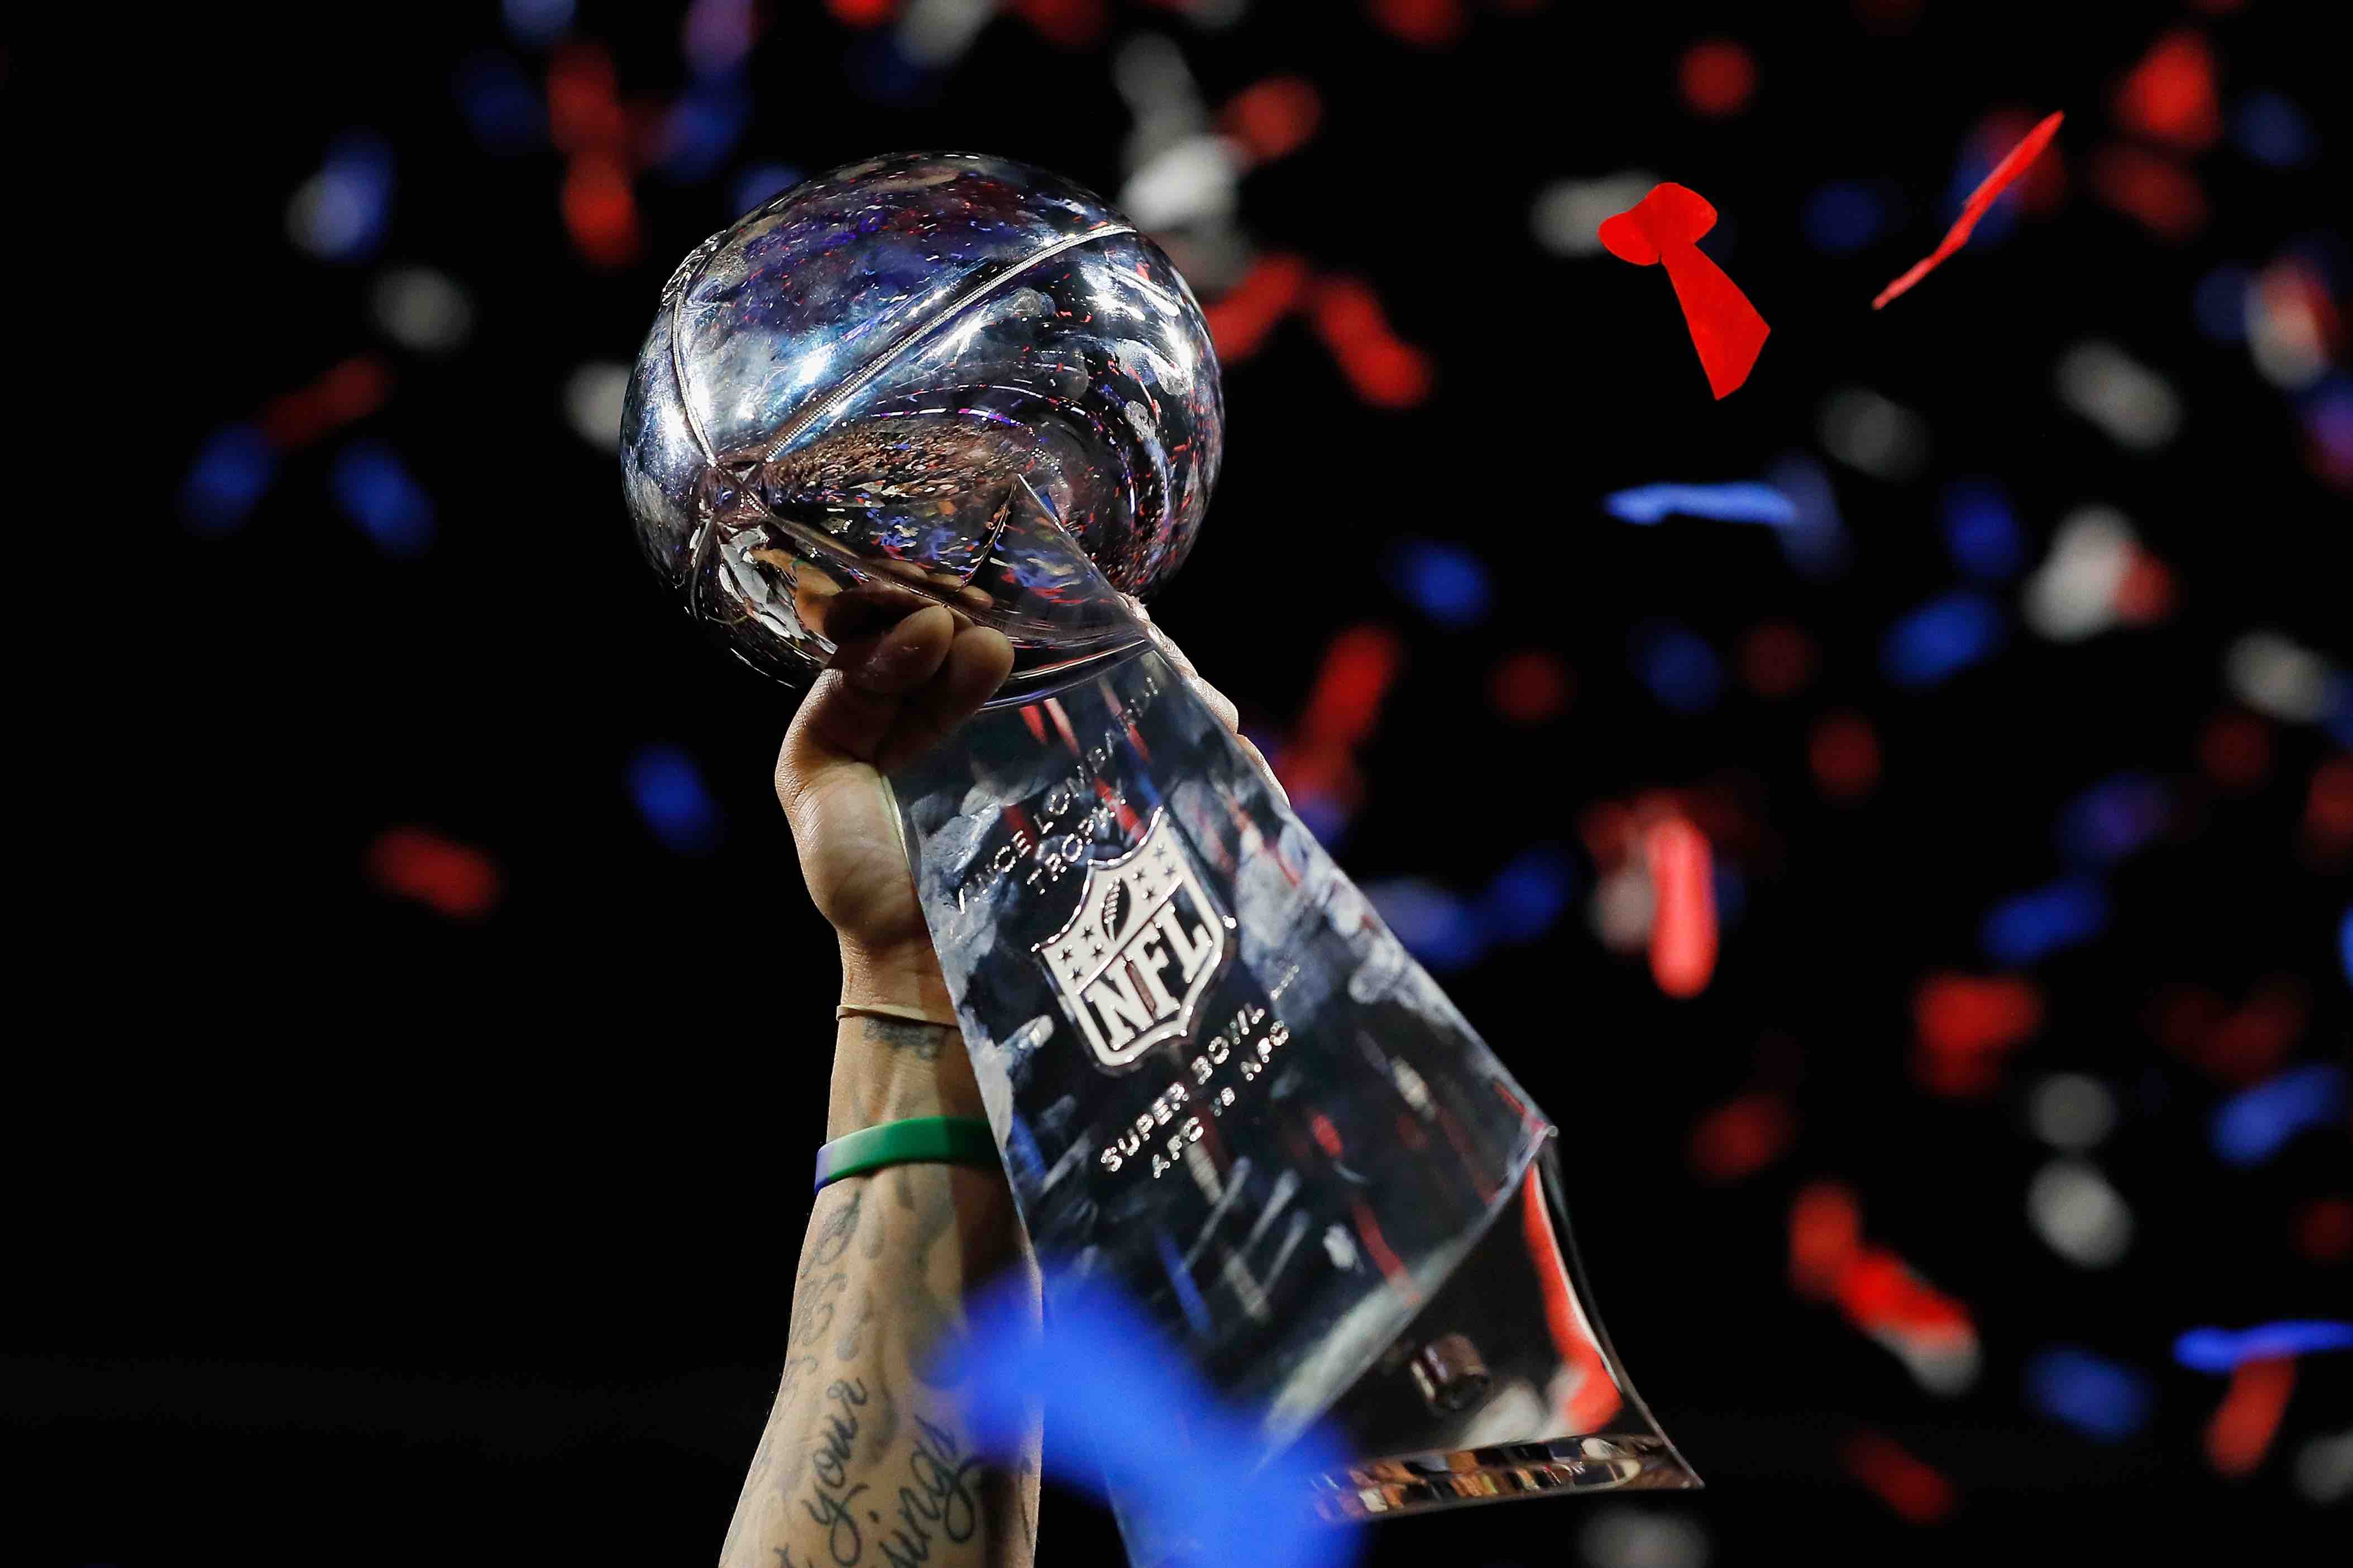 A detail of a New England Patriots player raising the Vince Lombardi Trophy at the Super Bowl